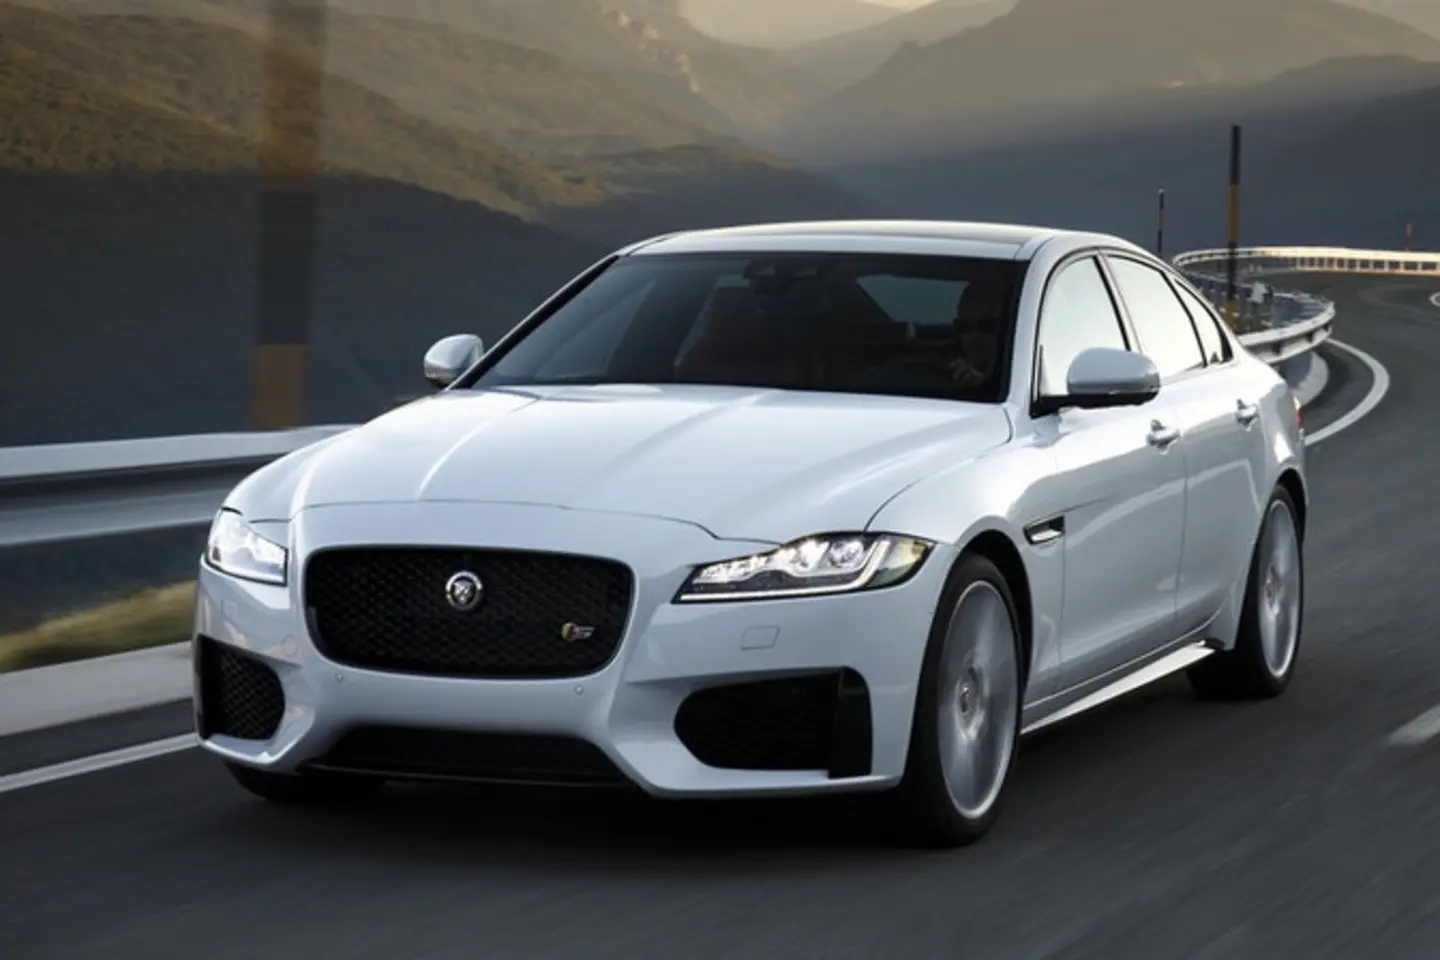 The exterior of a white Jaguar XF